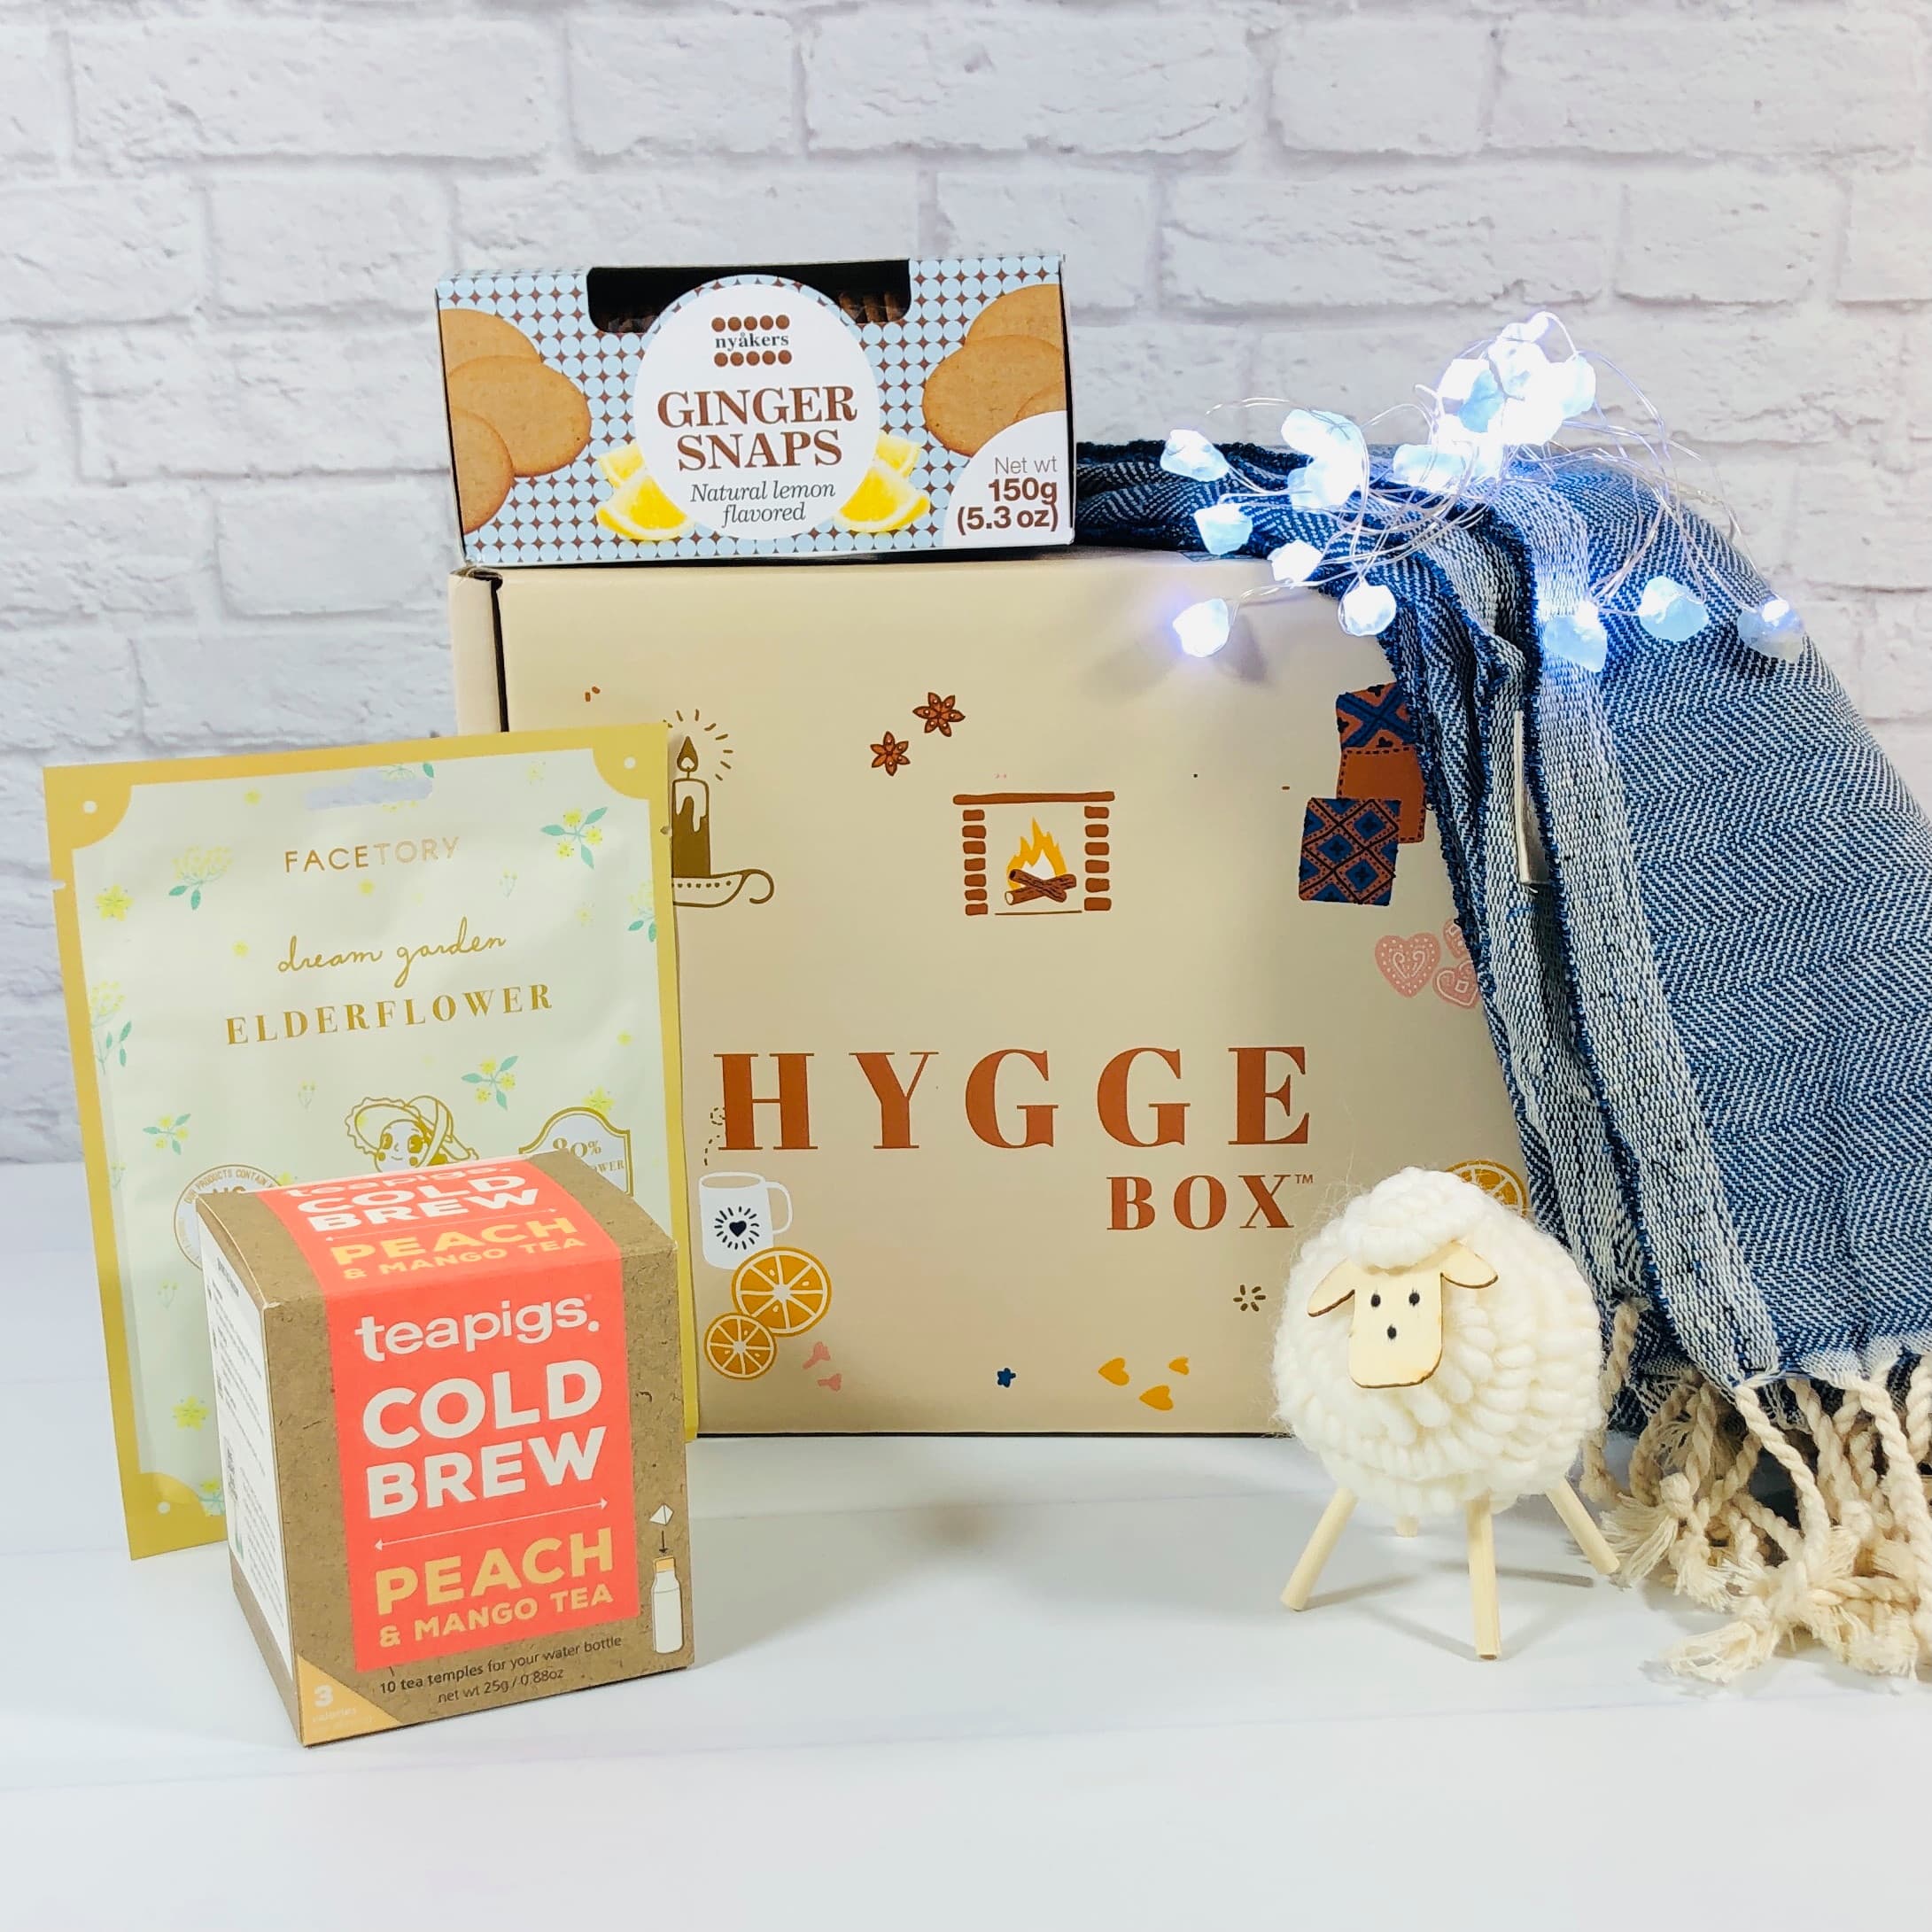 https://cdn.apartmenttherapy.info/image/upload/v1631290454/at/Holiday%20Gift%20Guides%202021/Subscription%20Gifts/hygge-box-deluxe-june-2021-25.jpg